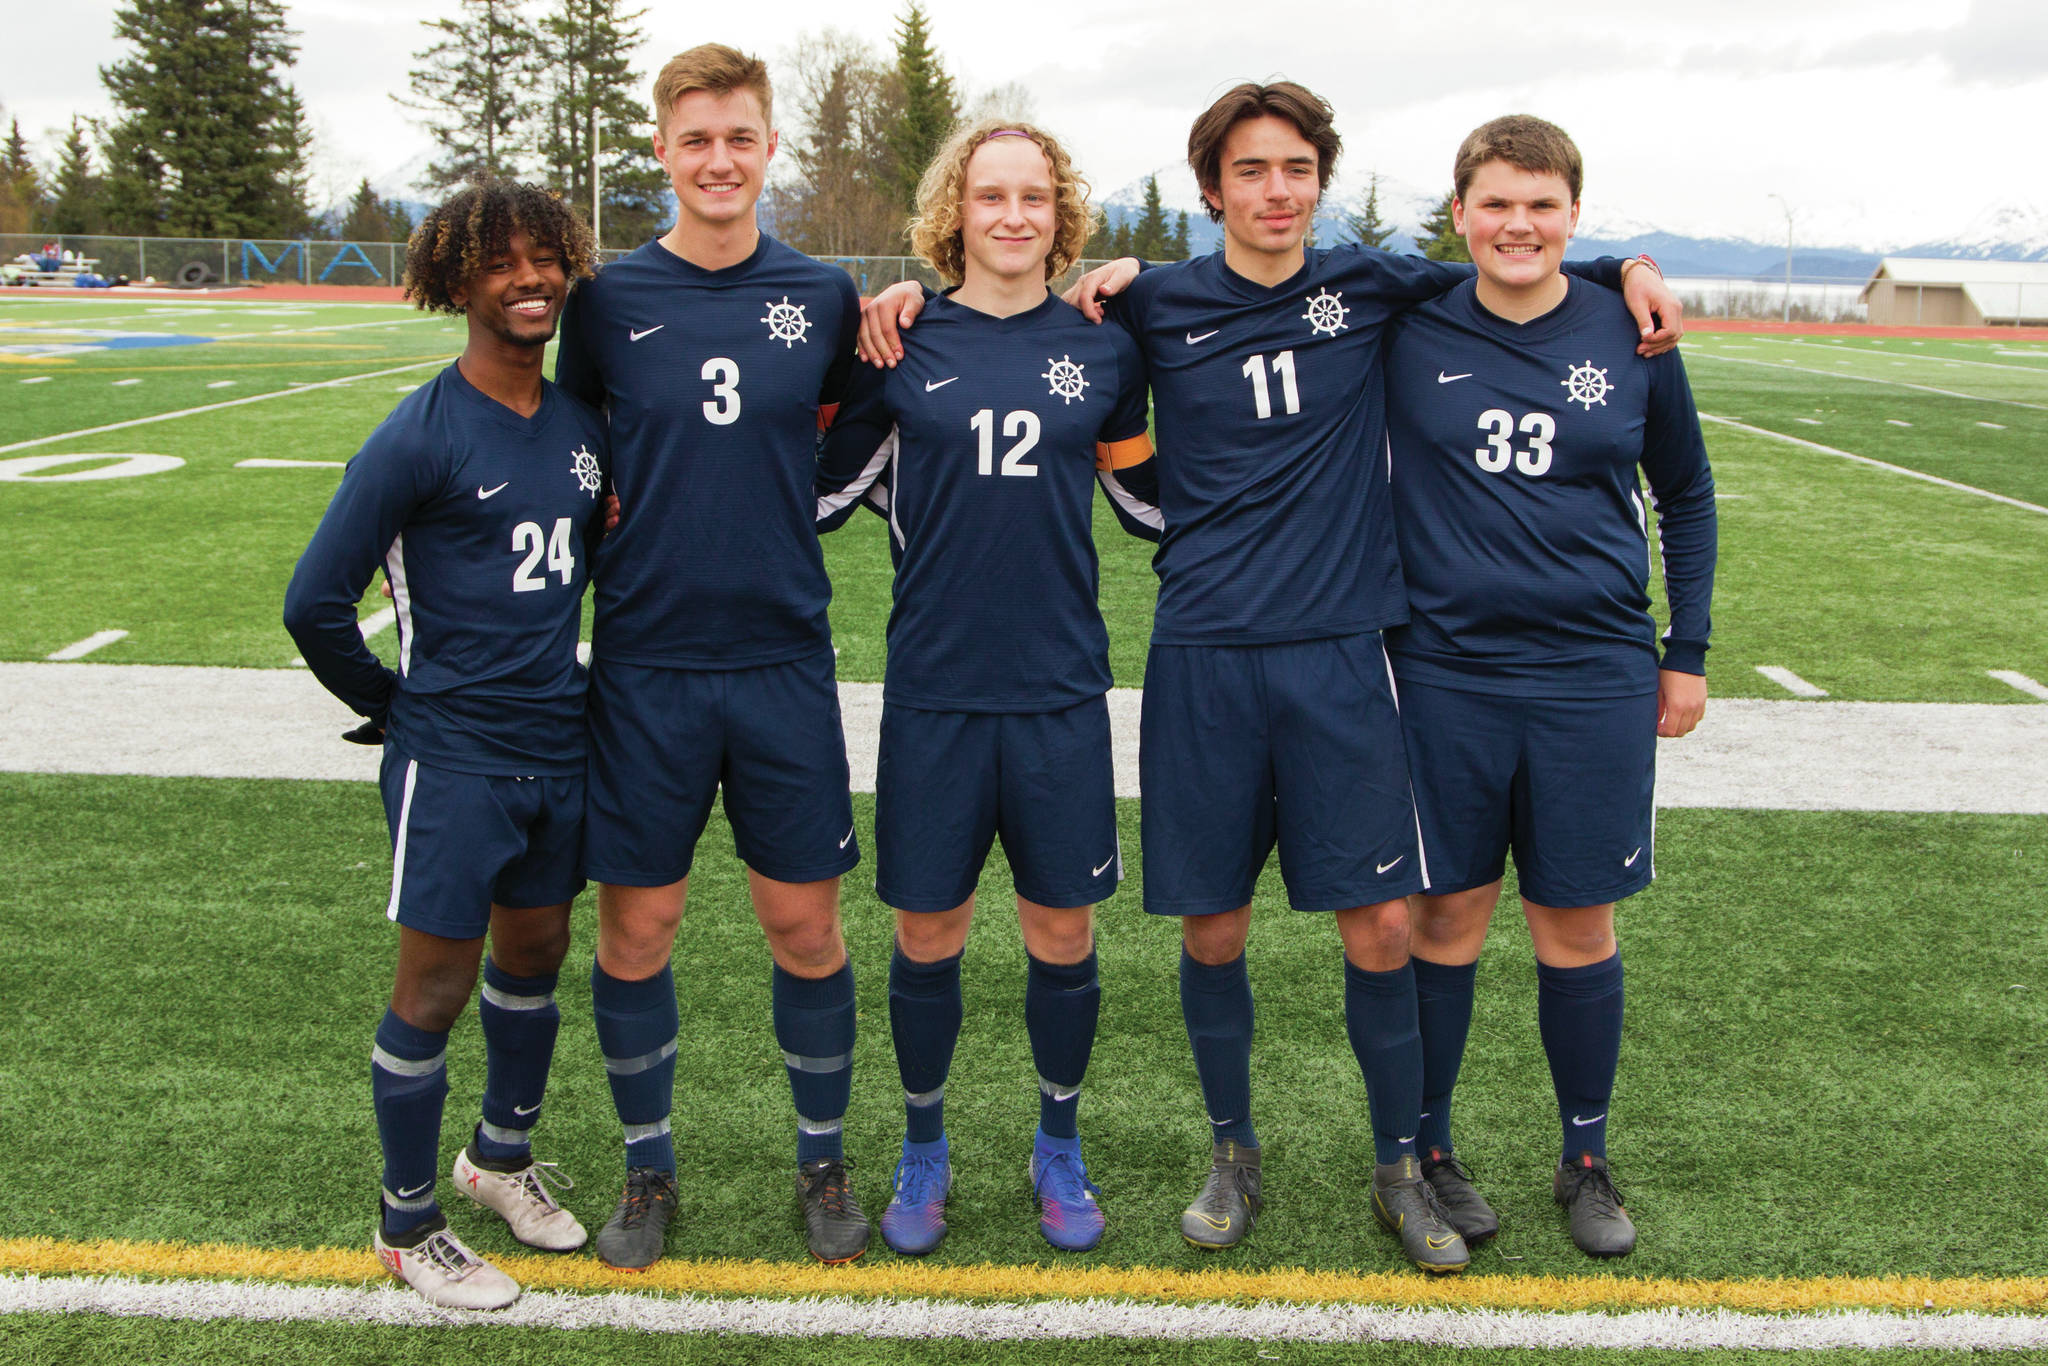 The seniors on the Homer High School boys soccer team were recognized in a ceremony May 14. Pictured left to right are Eyoab Knapp, Clayton Beachy, Parker Lowney, Tanner Reid and Owen Glasman. Not pictured is Austin Cline.